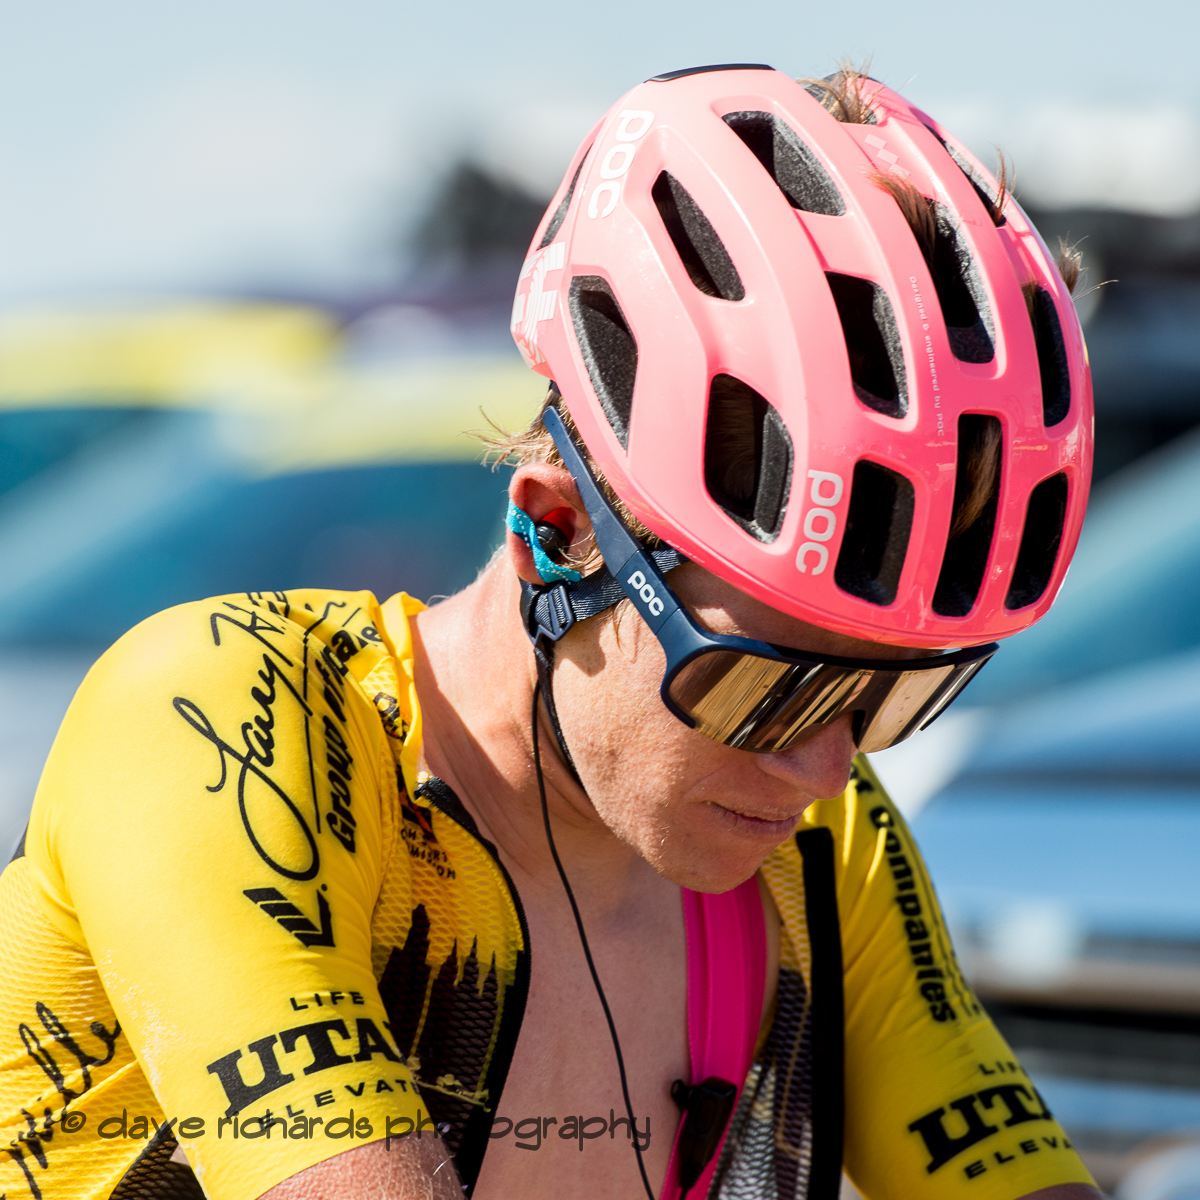 Race leader Lawson Craddock ( EF Education First) made a valiant effort but ended up losing the yellow jersey on Stage 2 - Brigham City to Powder Mountain Resort, 2019 LHM Tour of Utah (Photo by Dave Richards, daverphoto.com)